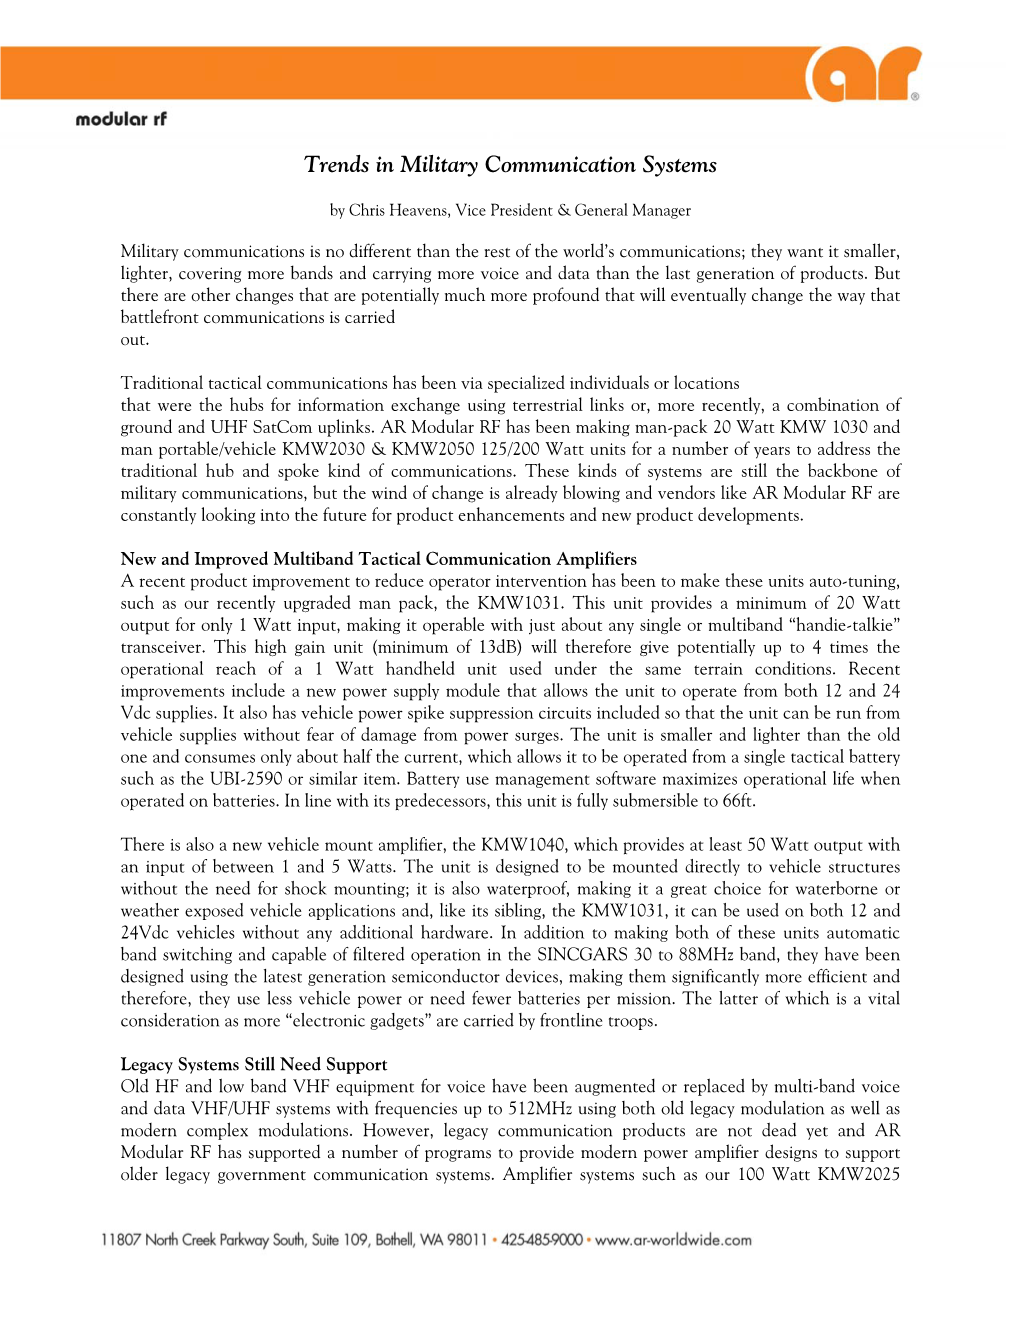 Trends in Military Communication Systems